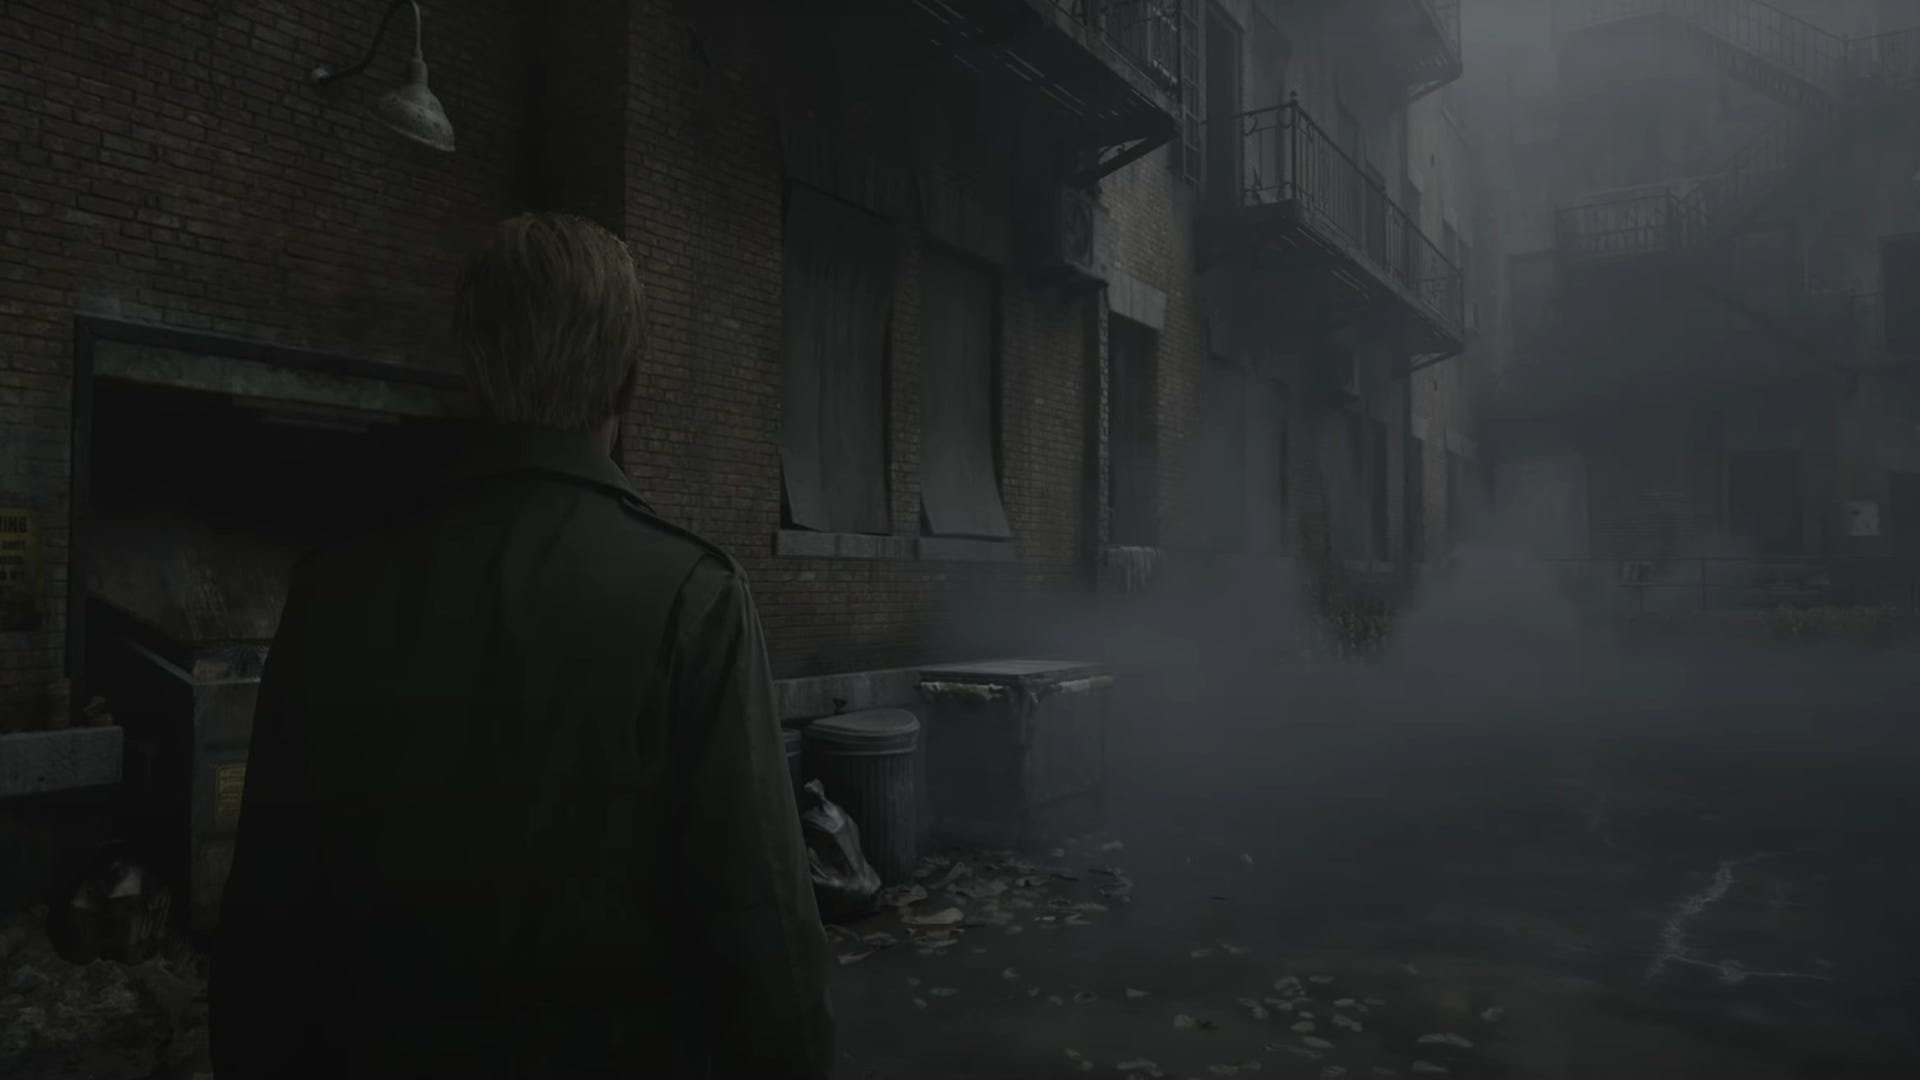 Silent Hill 2 combat reveal trailer shown off during Sony’s State of Play